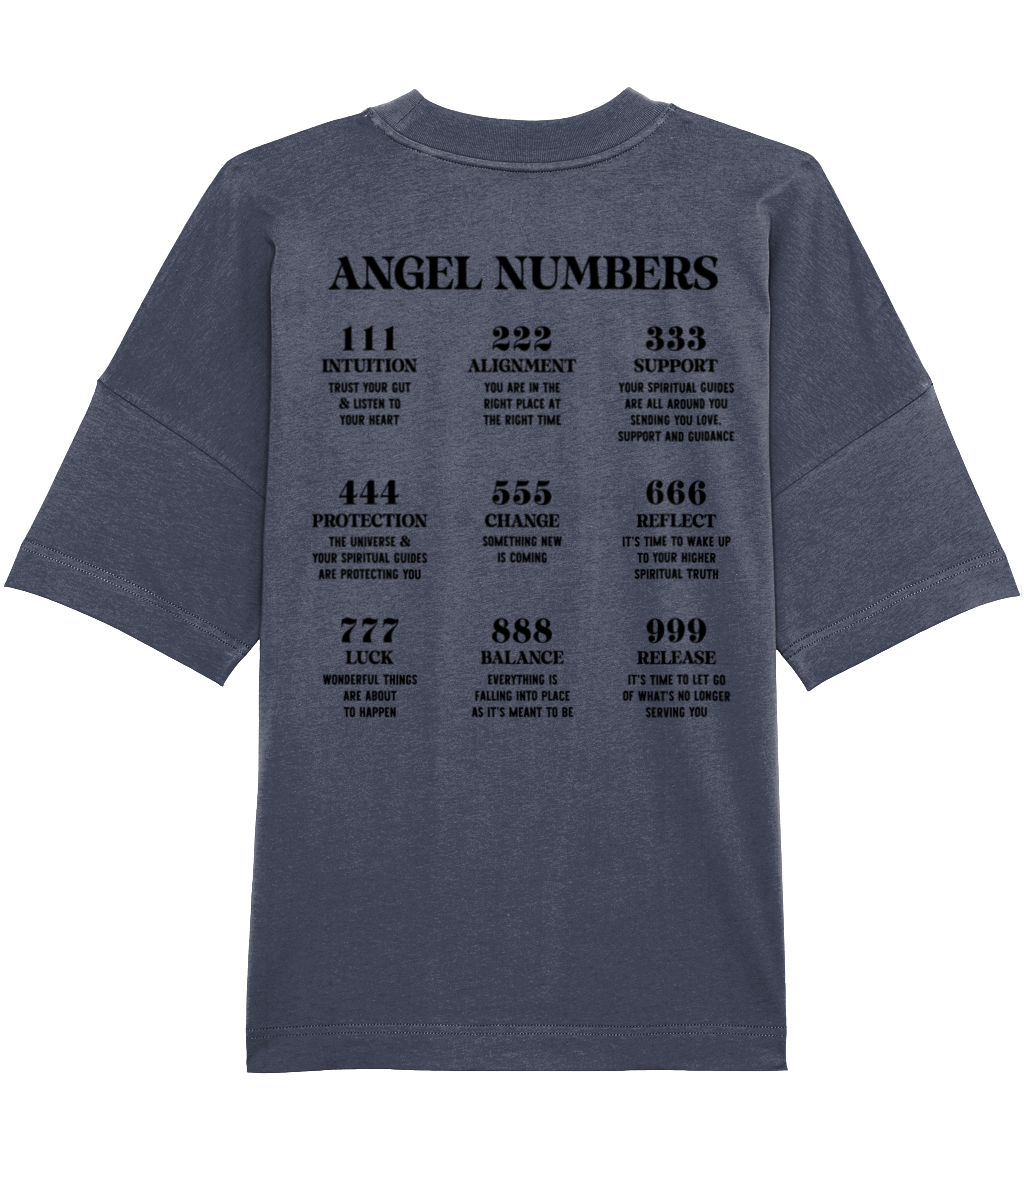 ANGEL NUMBERS OVERSIZED SHIRT